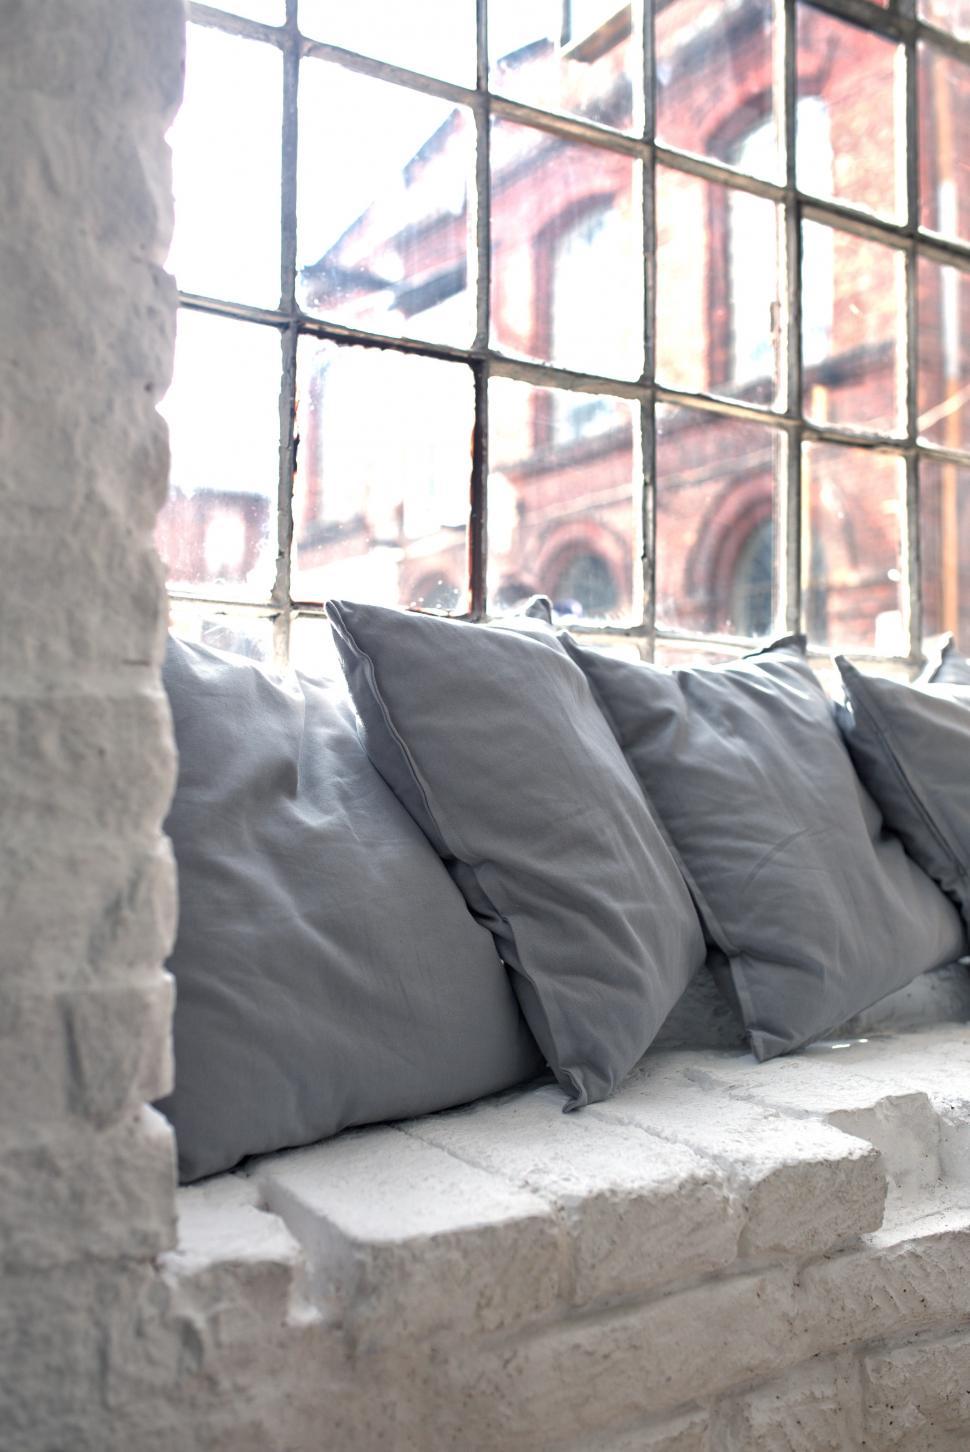 Free Image of Row of Pillows on Window Sill 